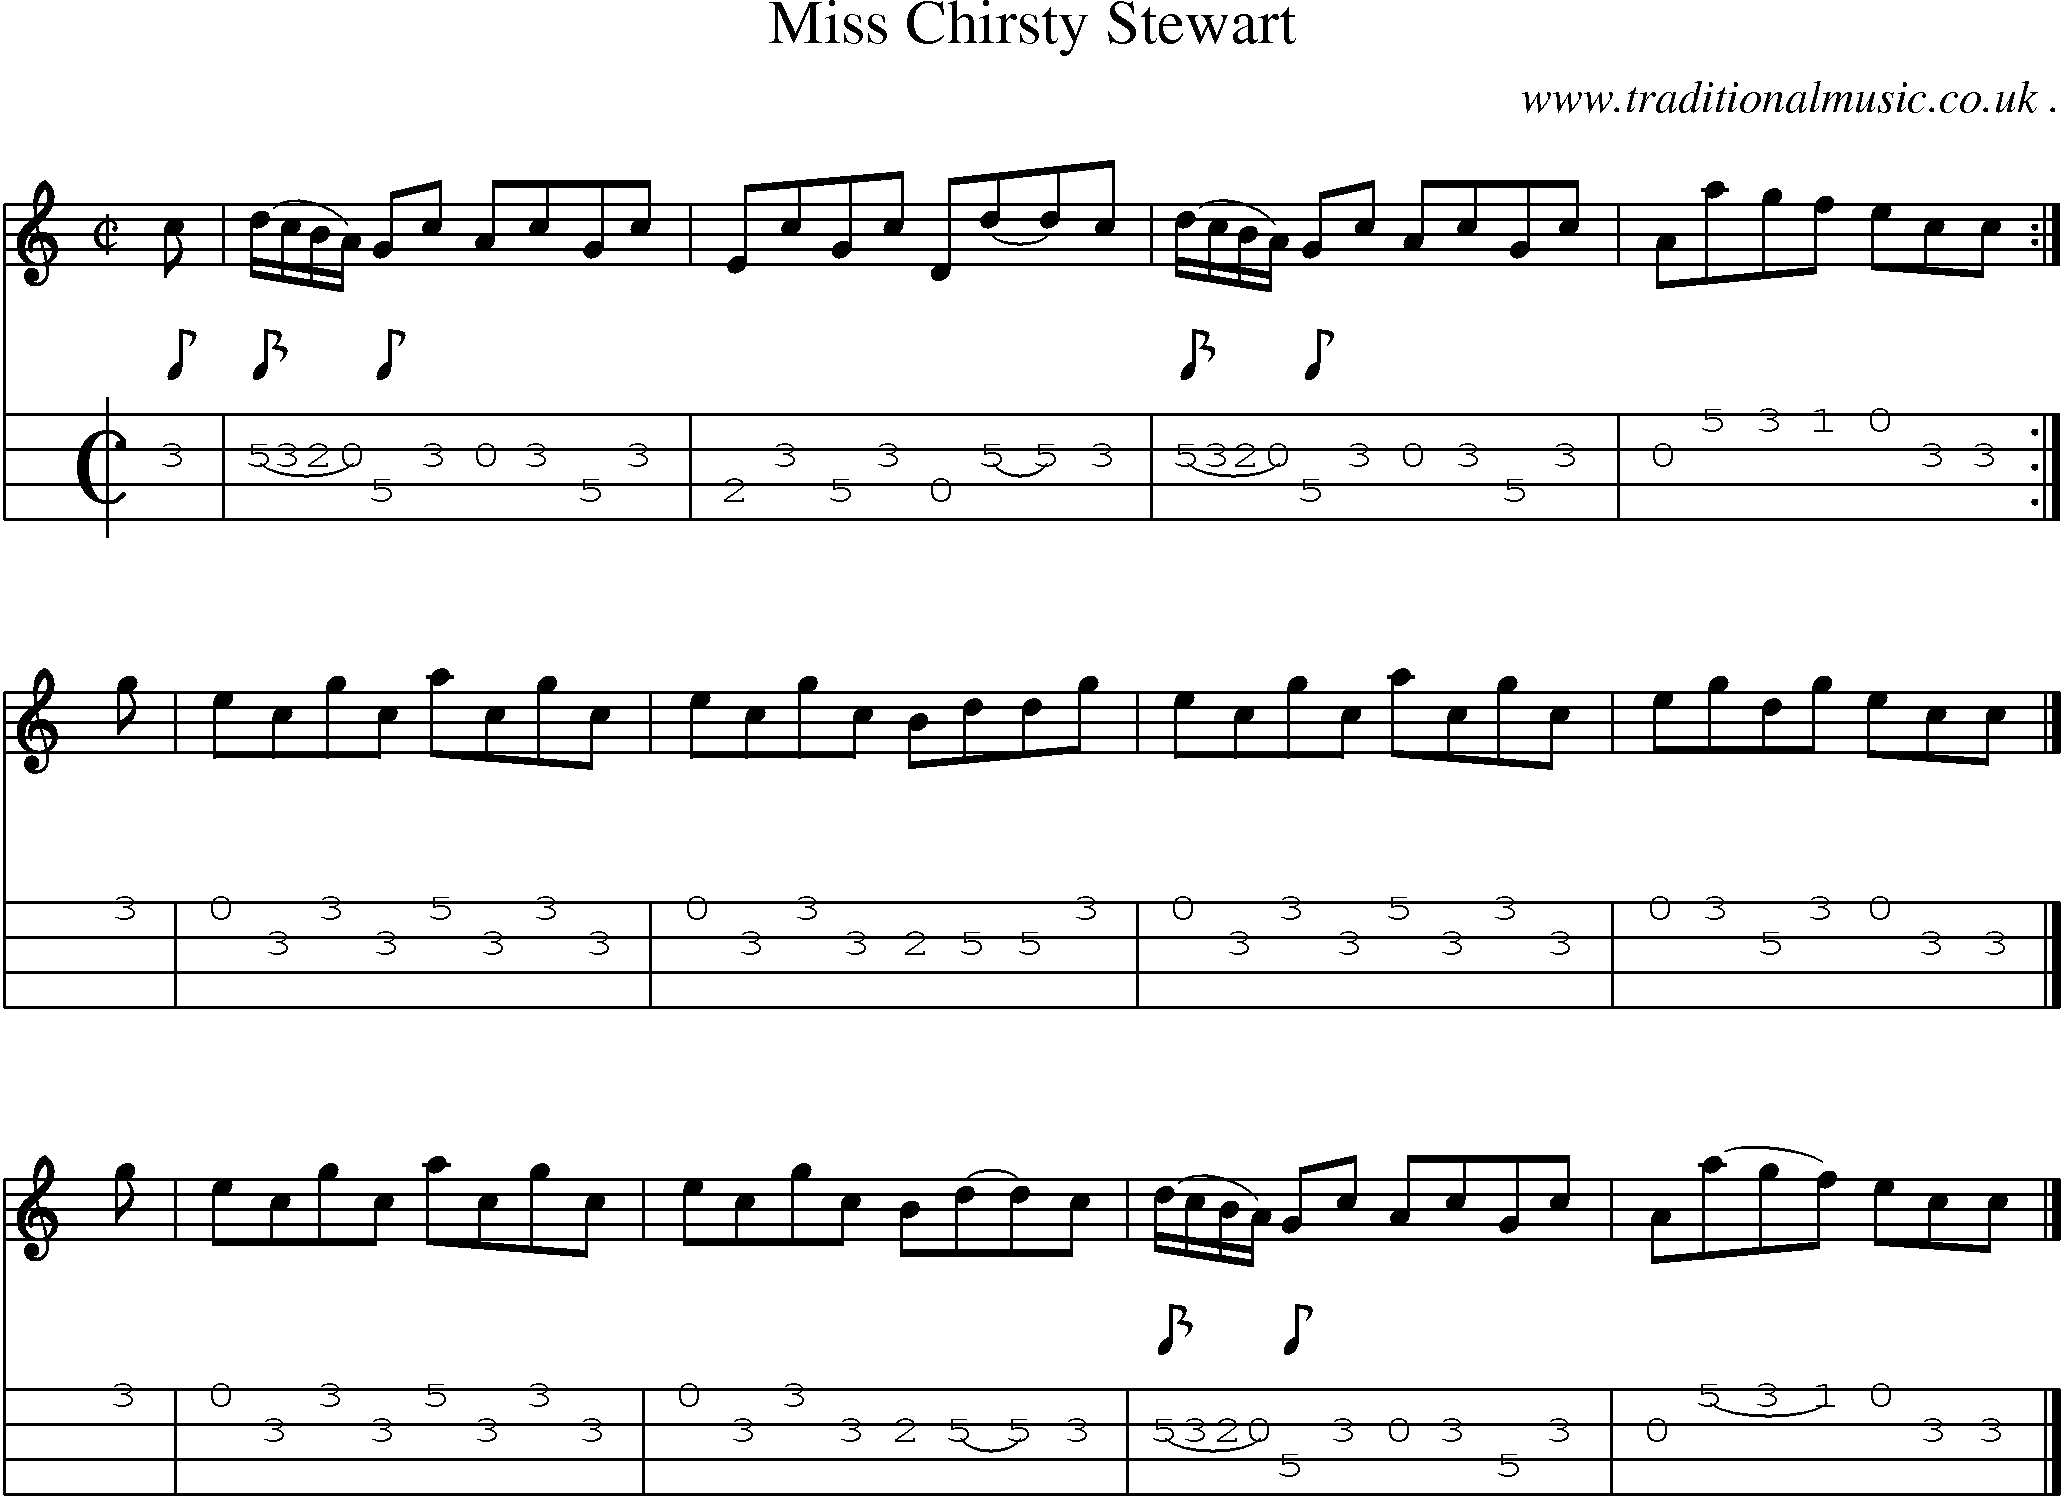 Sheet-music  score, Chords and Mandolin Tabs for Miss Chirsty Stewart